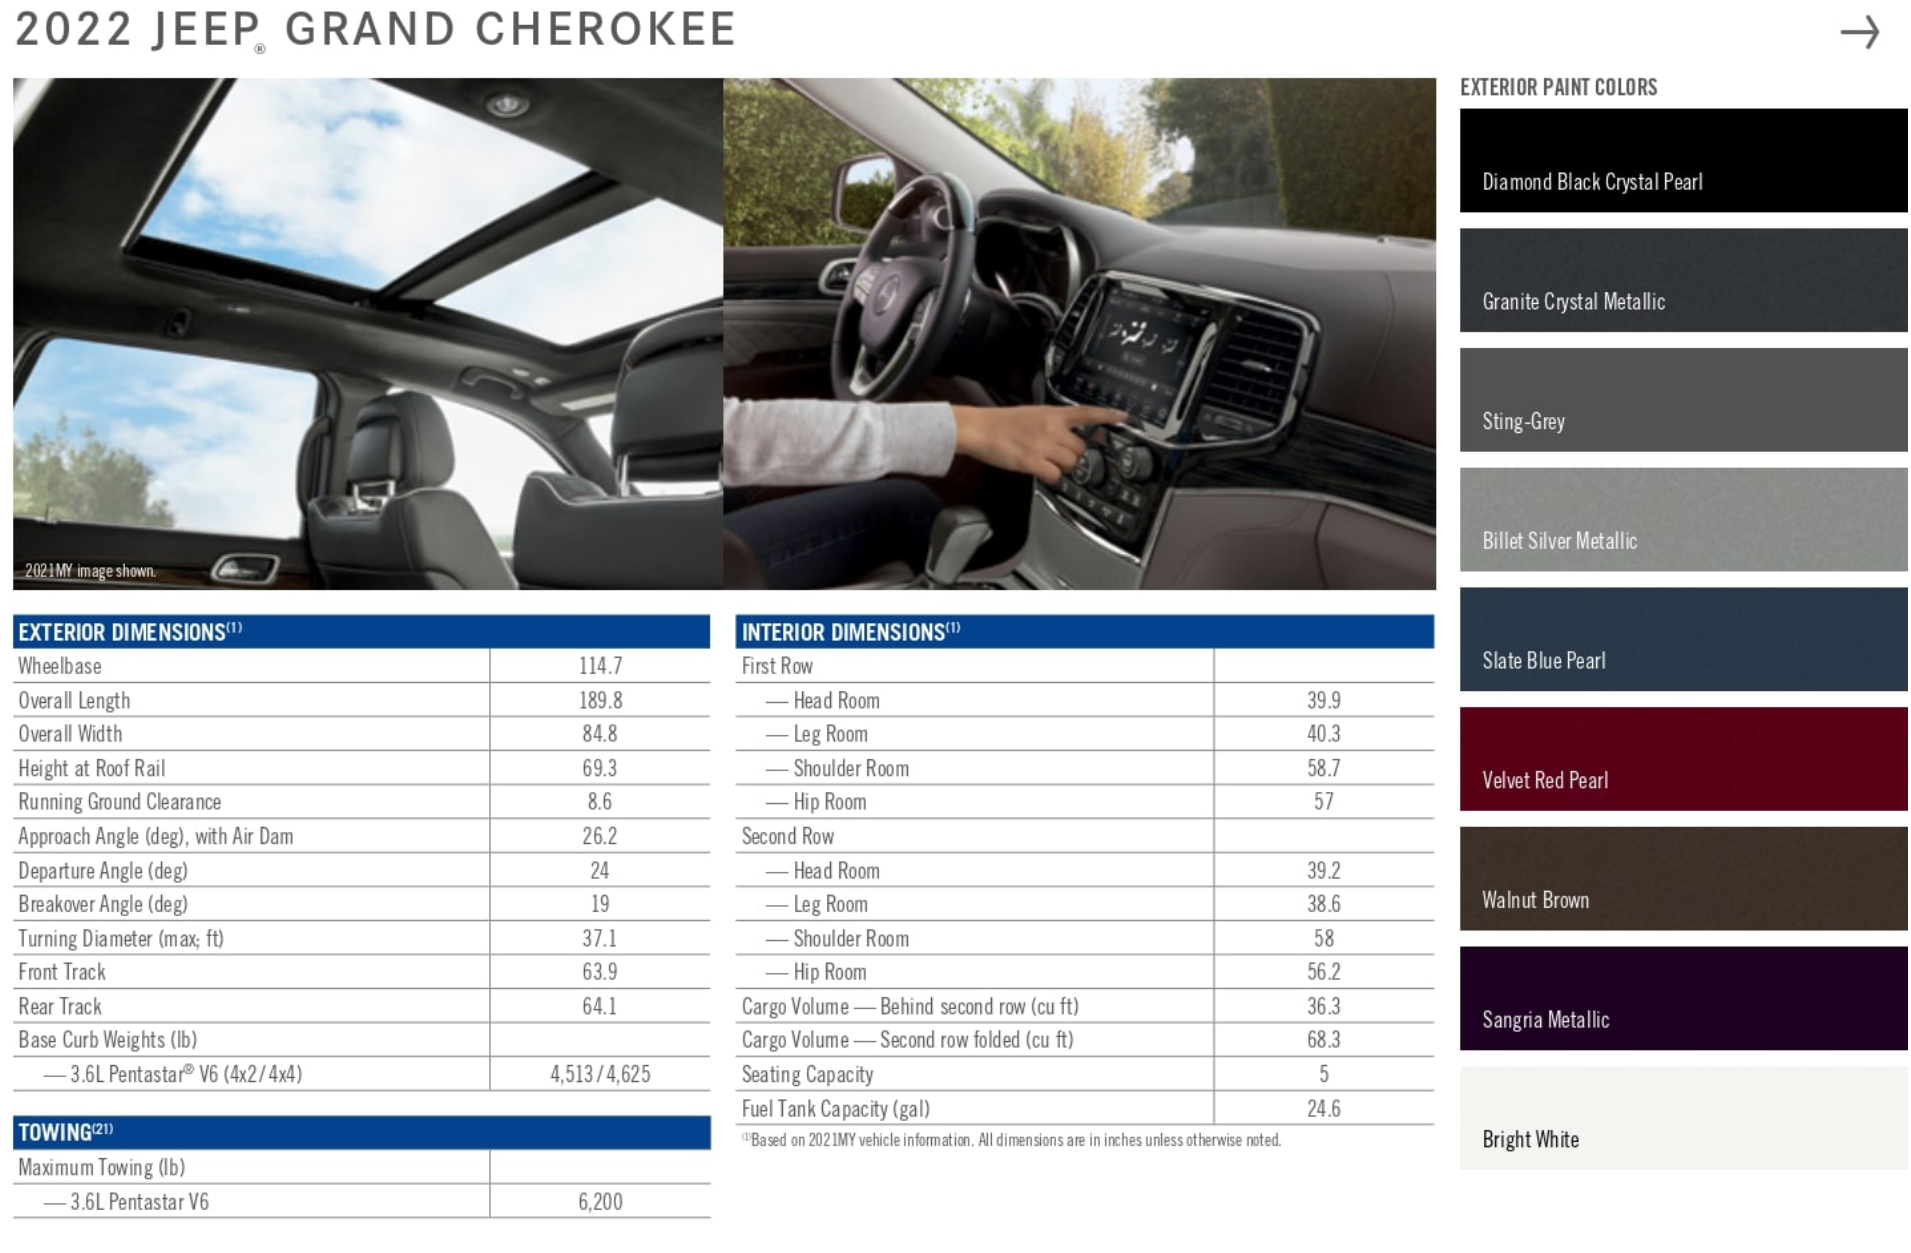 For the 2022 year color shades and examples of the exterior color of the jeep model.